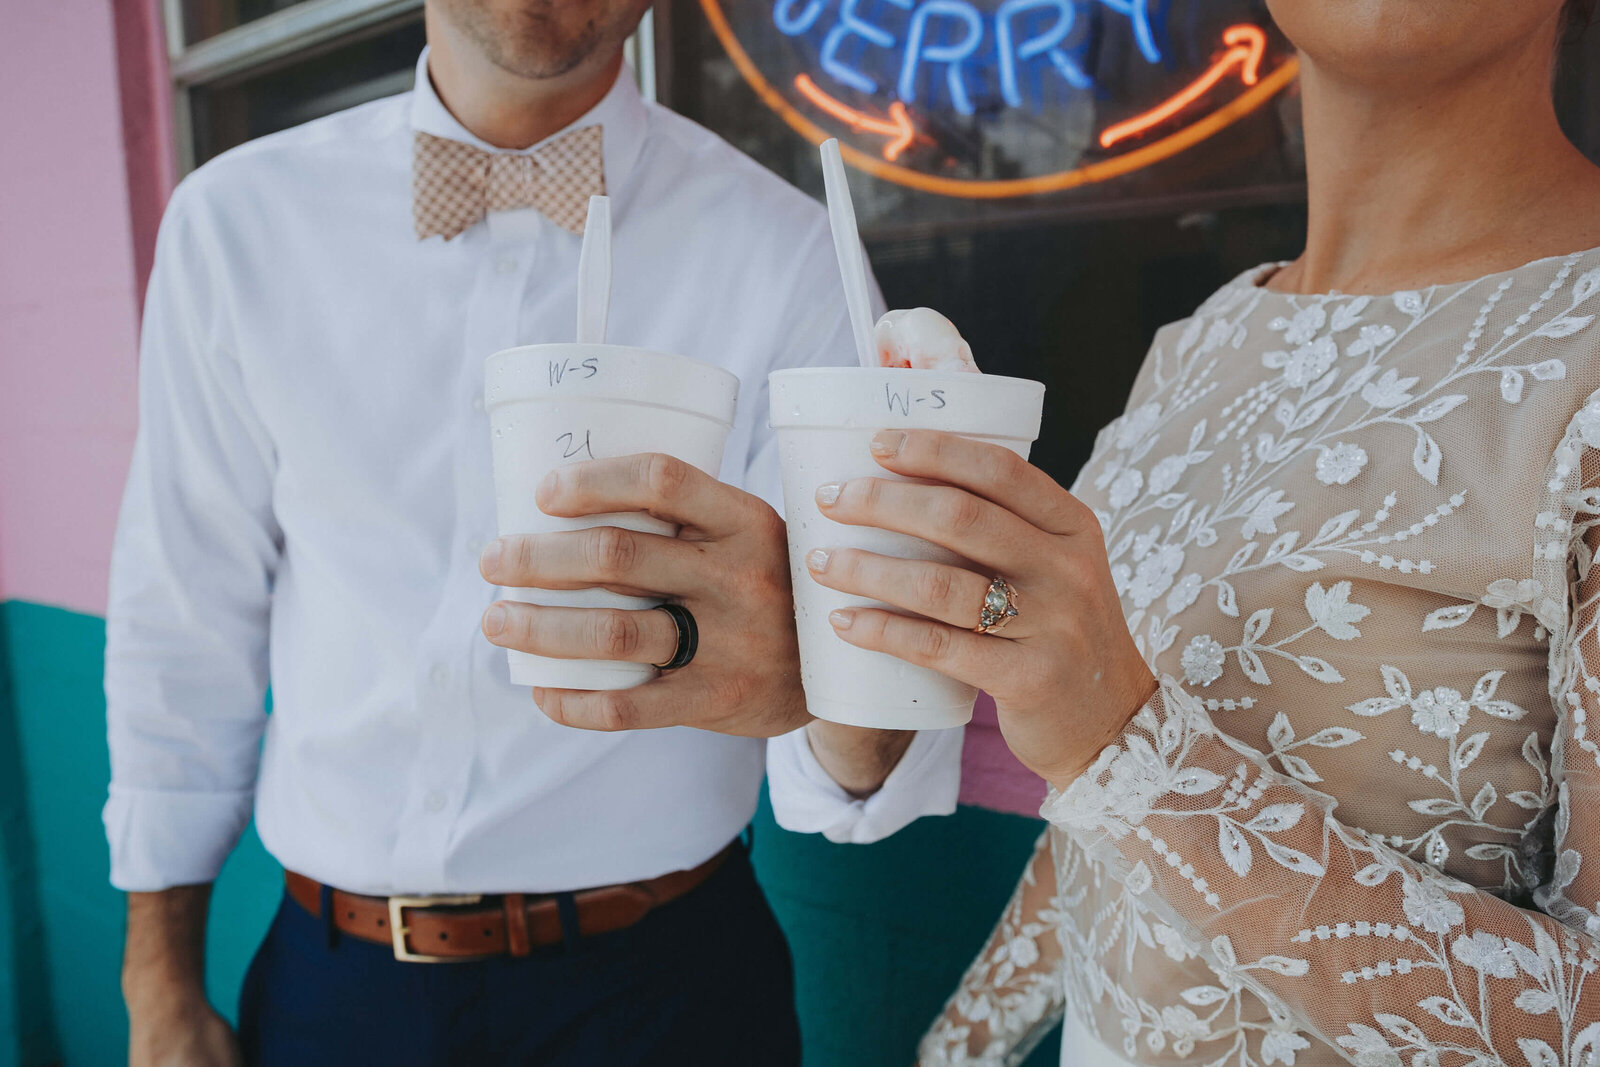 The newly married couple shares a wedding cake sno cone together after their intimate courthouse wedding